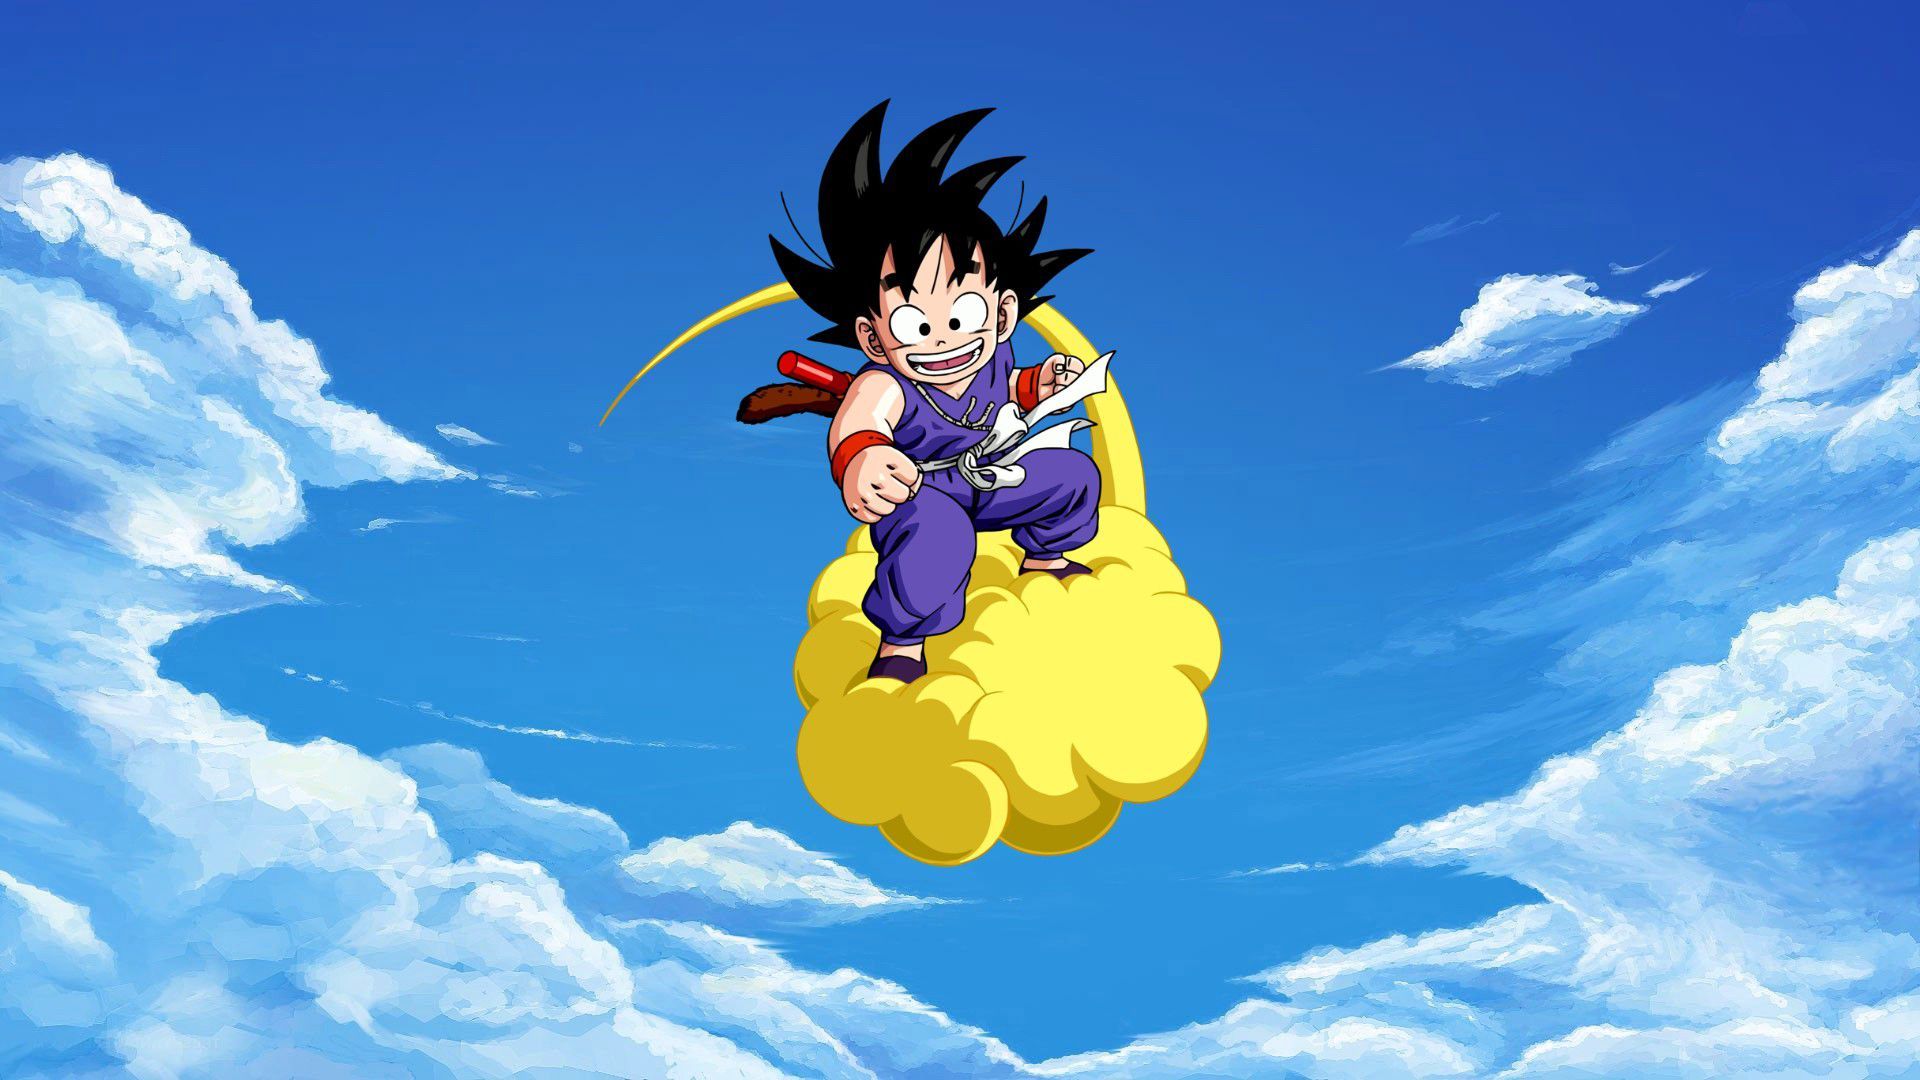 630 Best Dragon ball wallpapers ideas in 2023  dragon ball wallpapers dragon  ball anime dragon ball